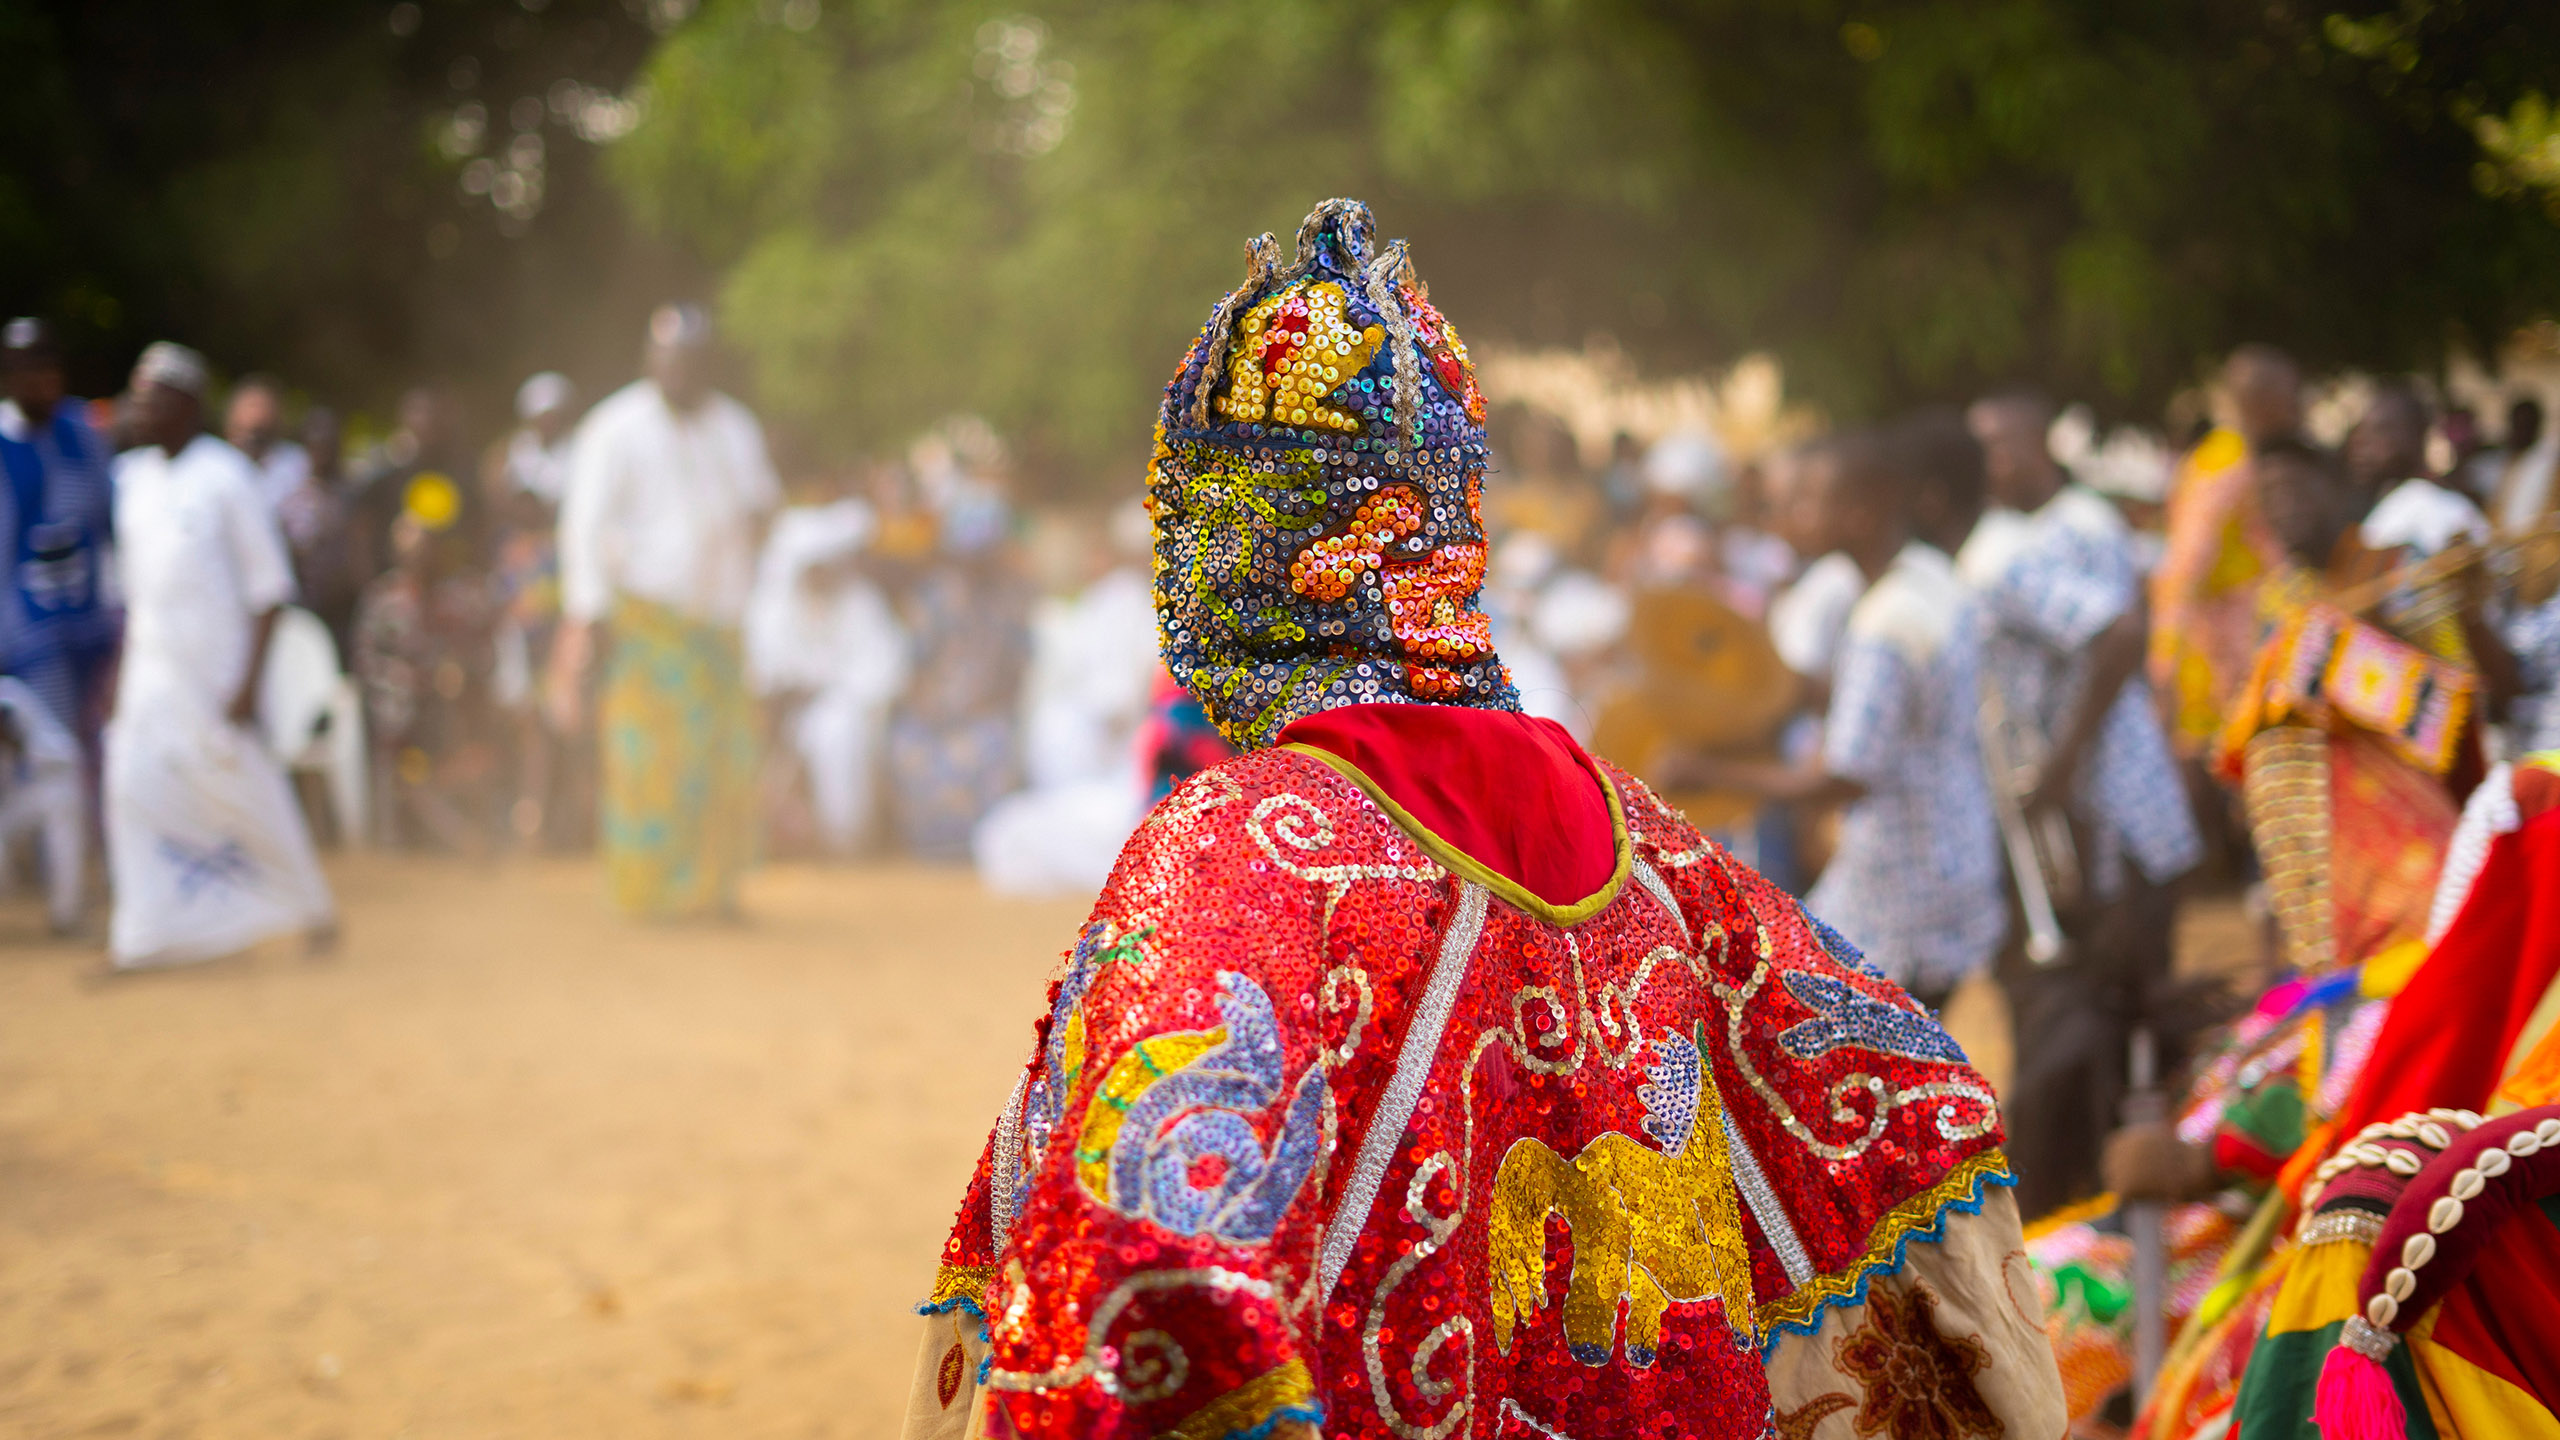 Cotonou, Benin Republic - January 10 2022 : The Voodoo Festival on 10 January is a celebration of traditional religions in Benin, cradle of the voodoo cult. You can see in the image a Egungun